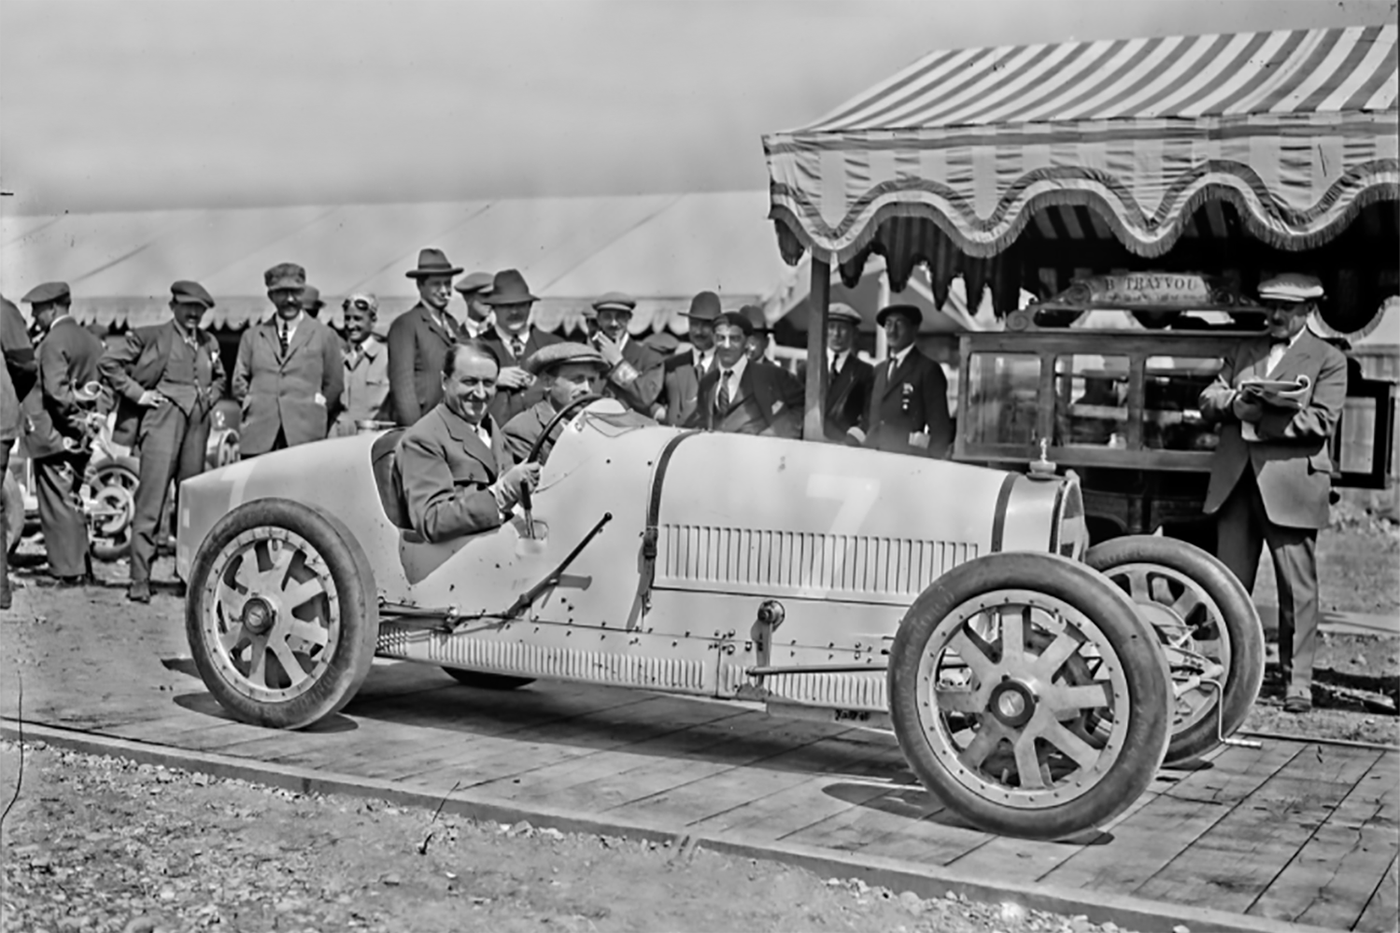 Ettore Bugatti pictured at the Grand Prix of Lyon on August 2, 1924. This was the first time the world had ever seen the Bugatti Type 35. Over the next six years, Type 35s won more than 2000 races, and gained the title of "the world's most successful racing car" – a title that is still indisputable to this day. The most obvious departure from traditional race car engineering was the use of cast aluminum wheels – just a decade earlier many Grand Prix cars still used wooden wheels. The Type 35 might as well have been from a different planet.